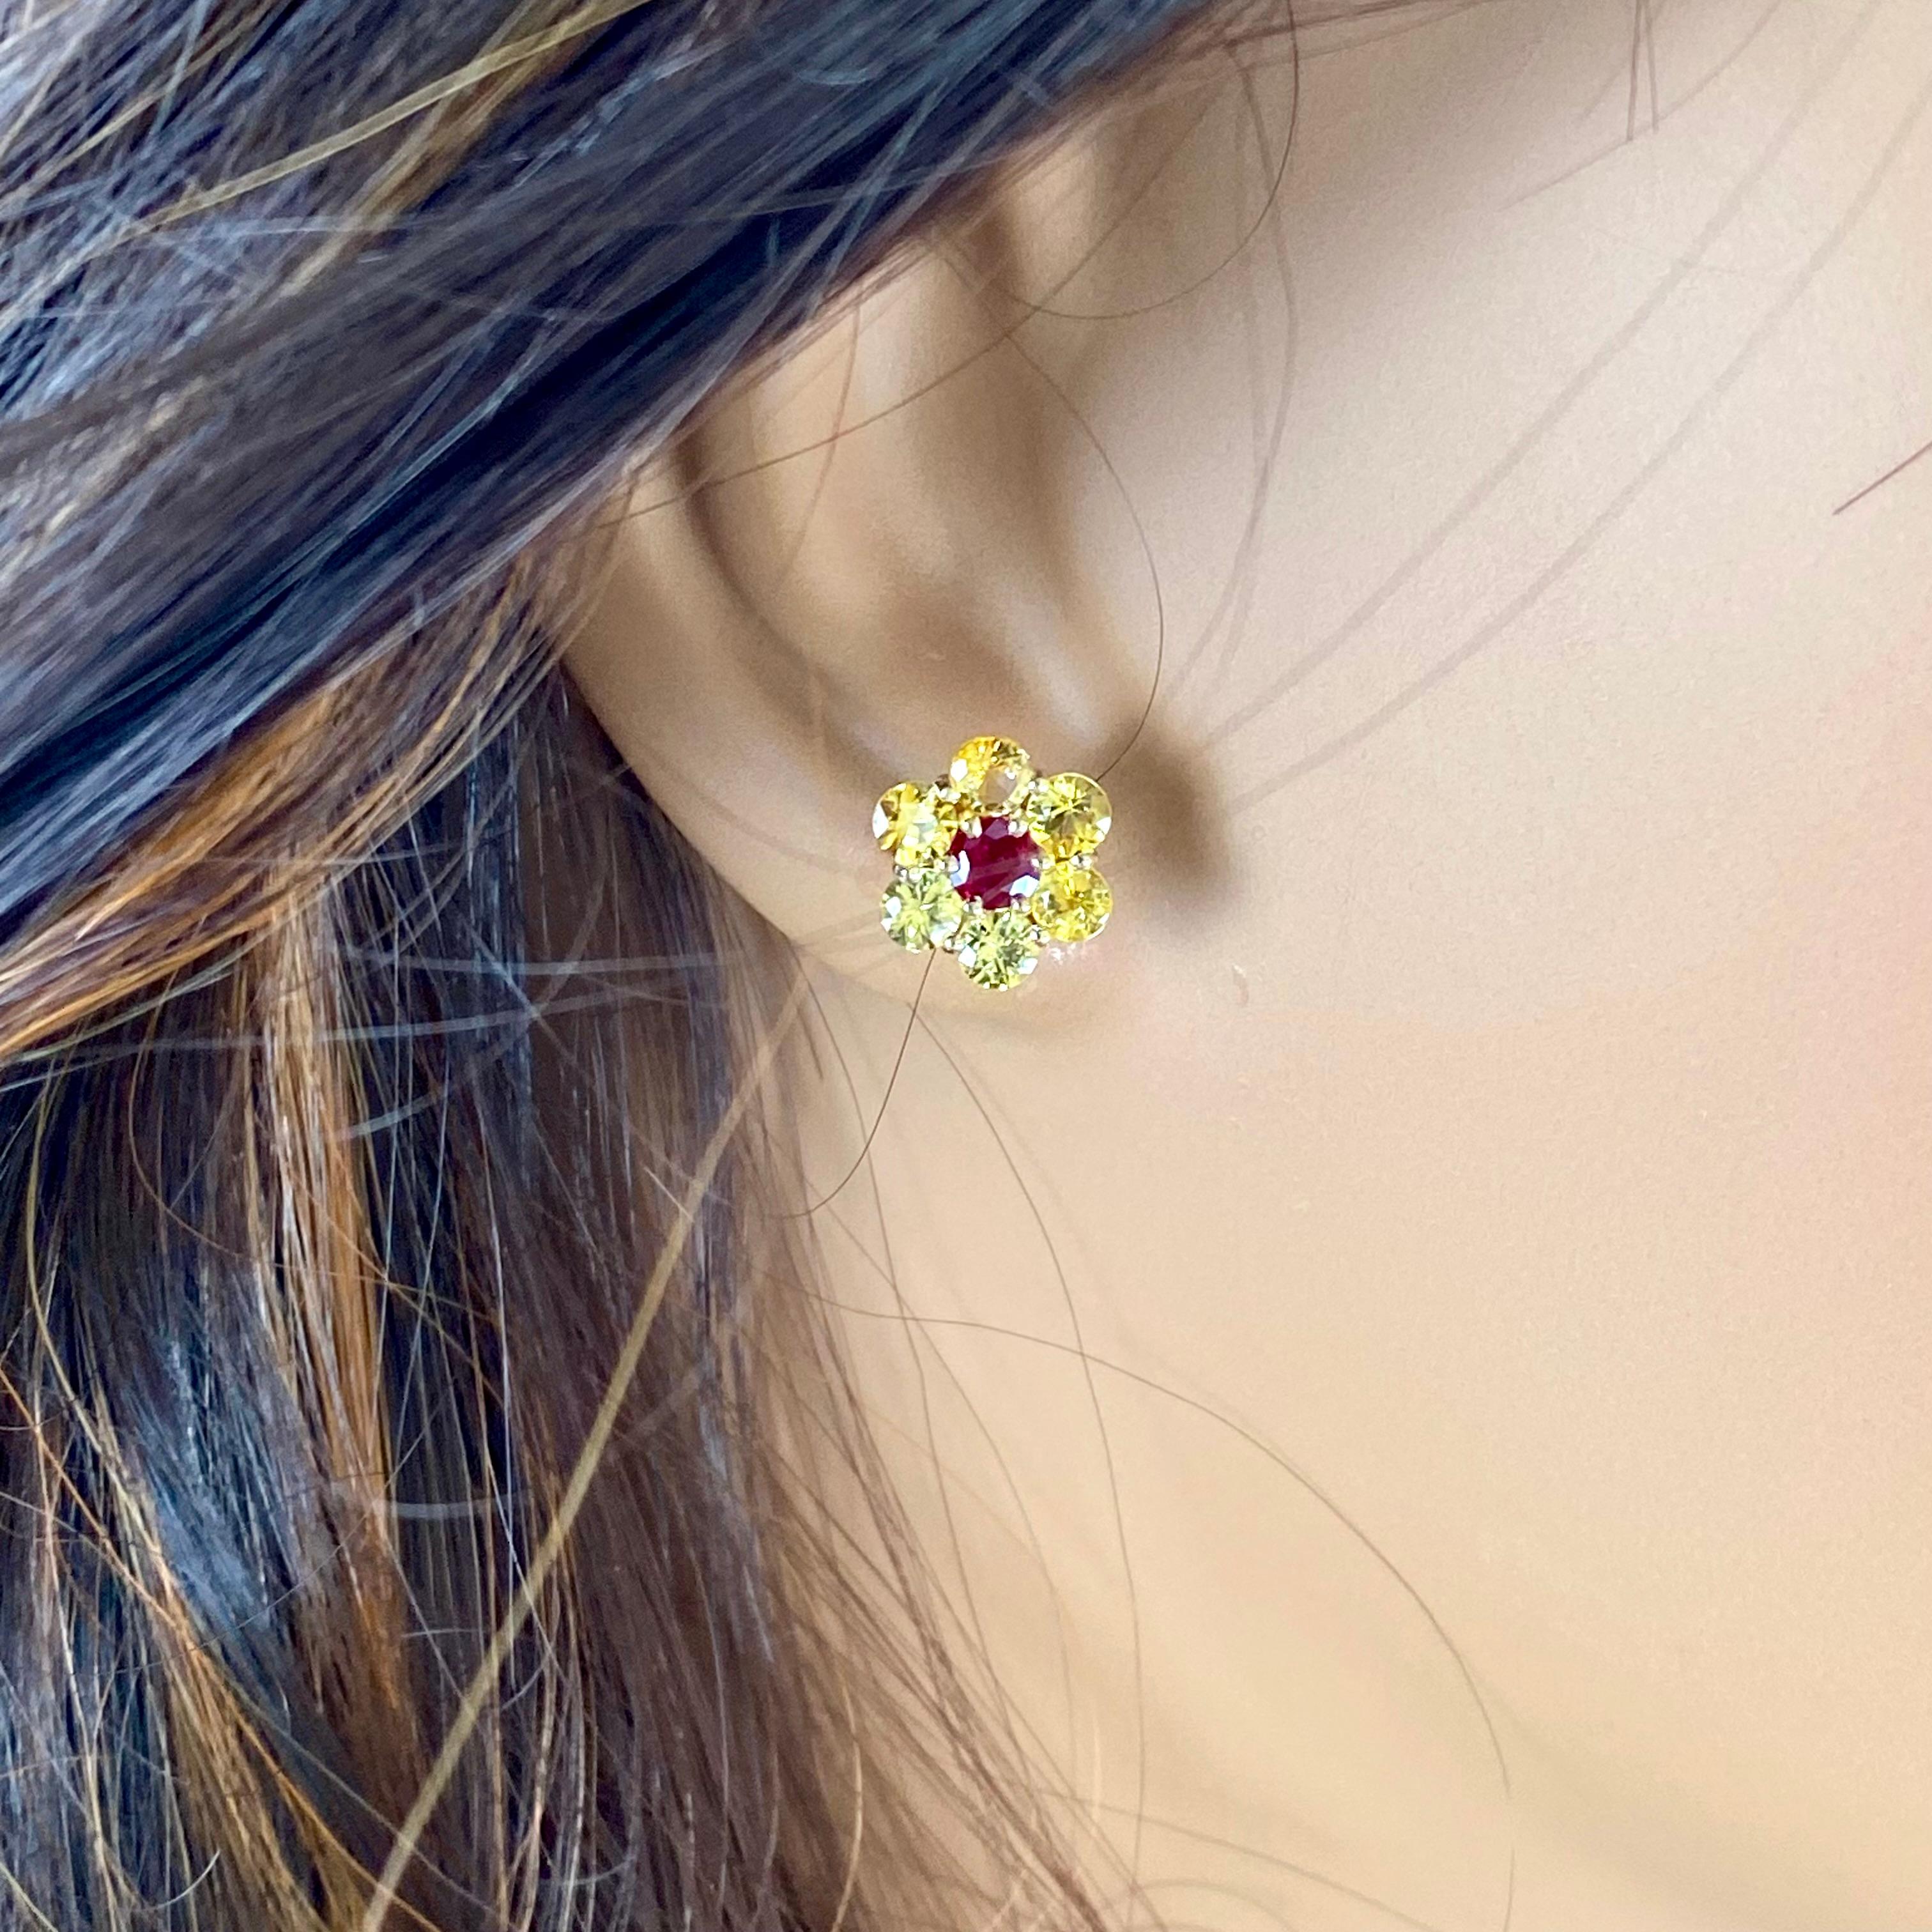 Introducing our exquisite 14 Karat Yellow Gold Floral Stud Earrings, a testament to elegance and sophistication. Crafted with meticulous attention to detail, these earrings are a stunning addition to any jewelry collection.
Each earring features a